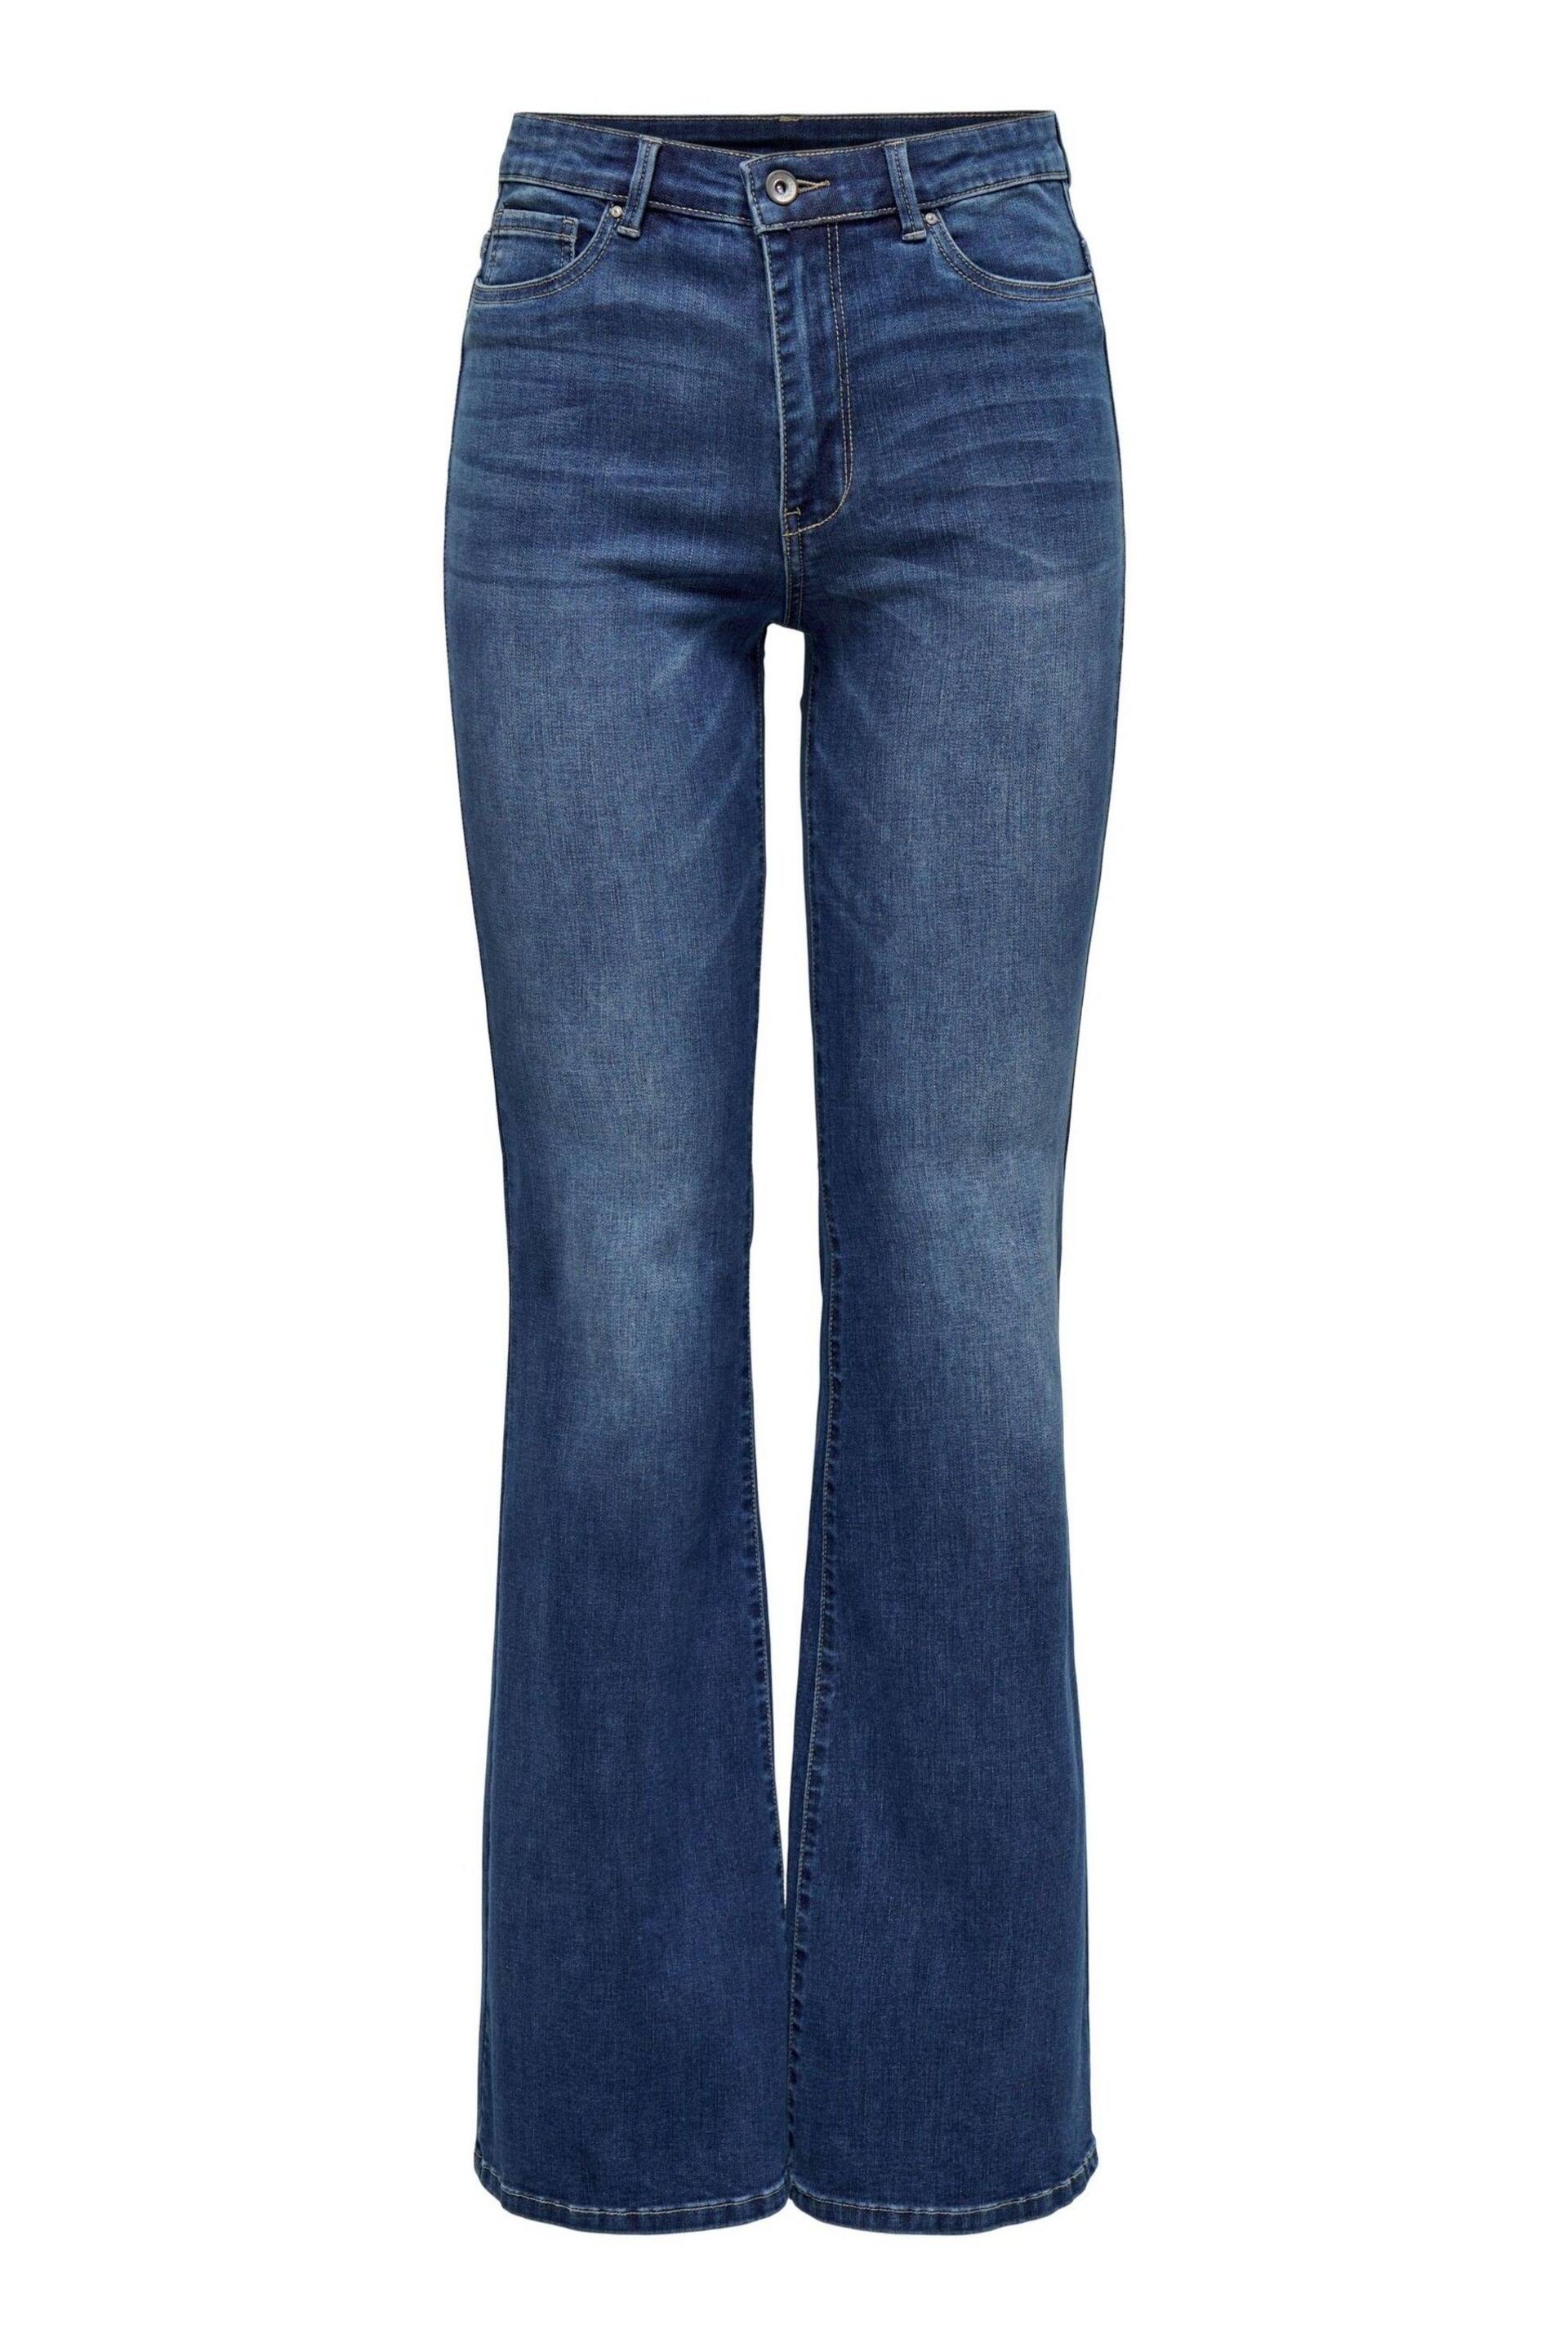 ONLY Blue High Waisted Flare Leg Rose Jeans - Image 6 of 8